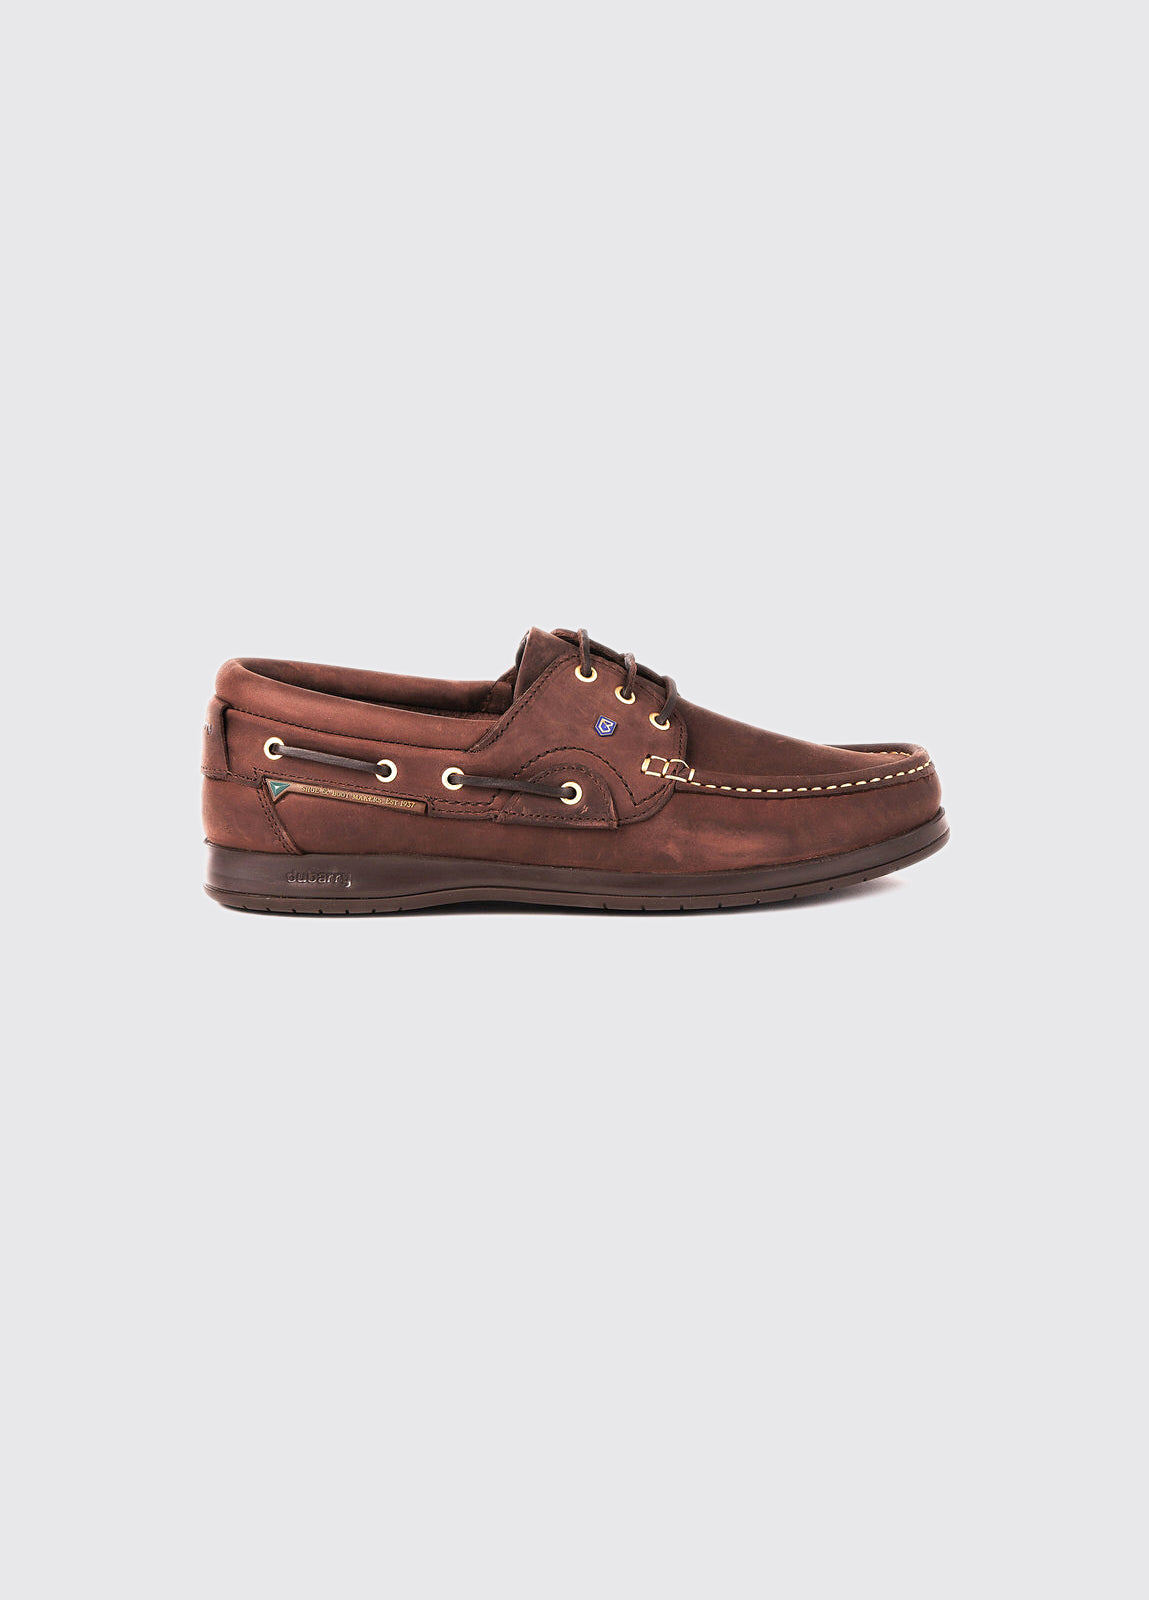 Commodore XLT Deck Shoe - Old Rum